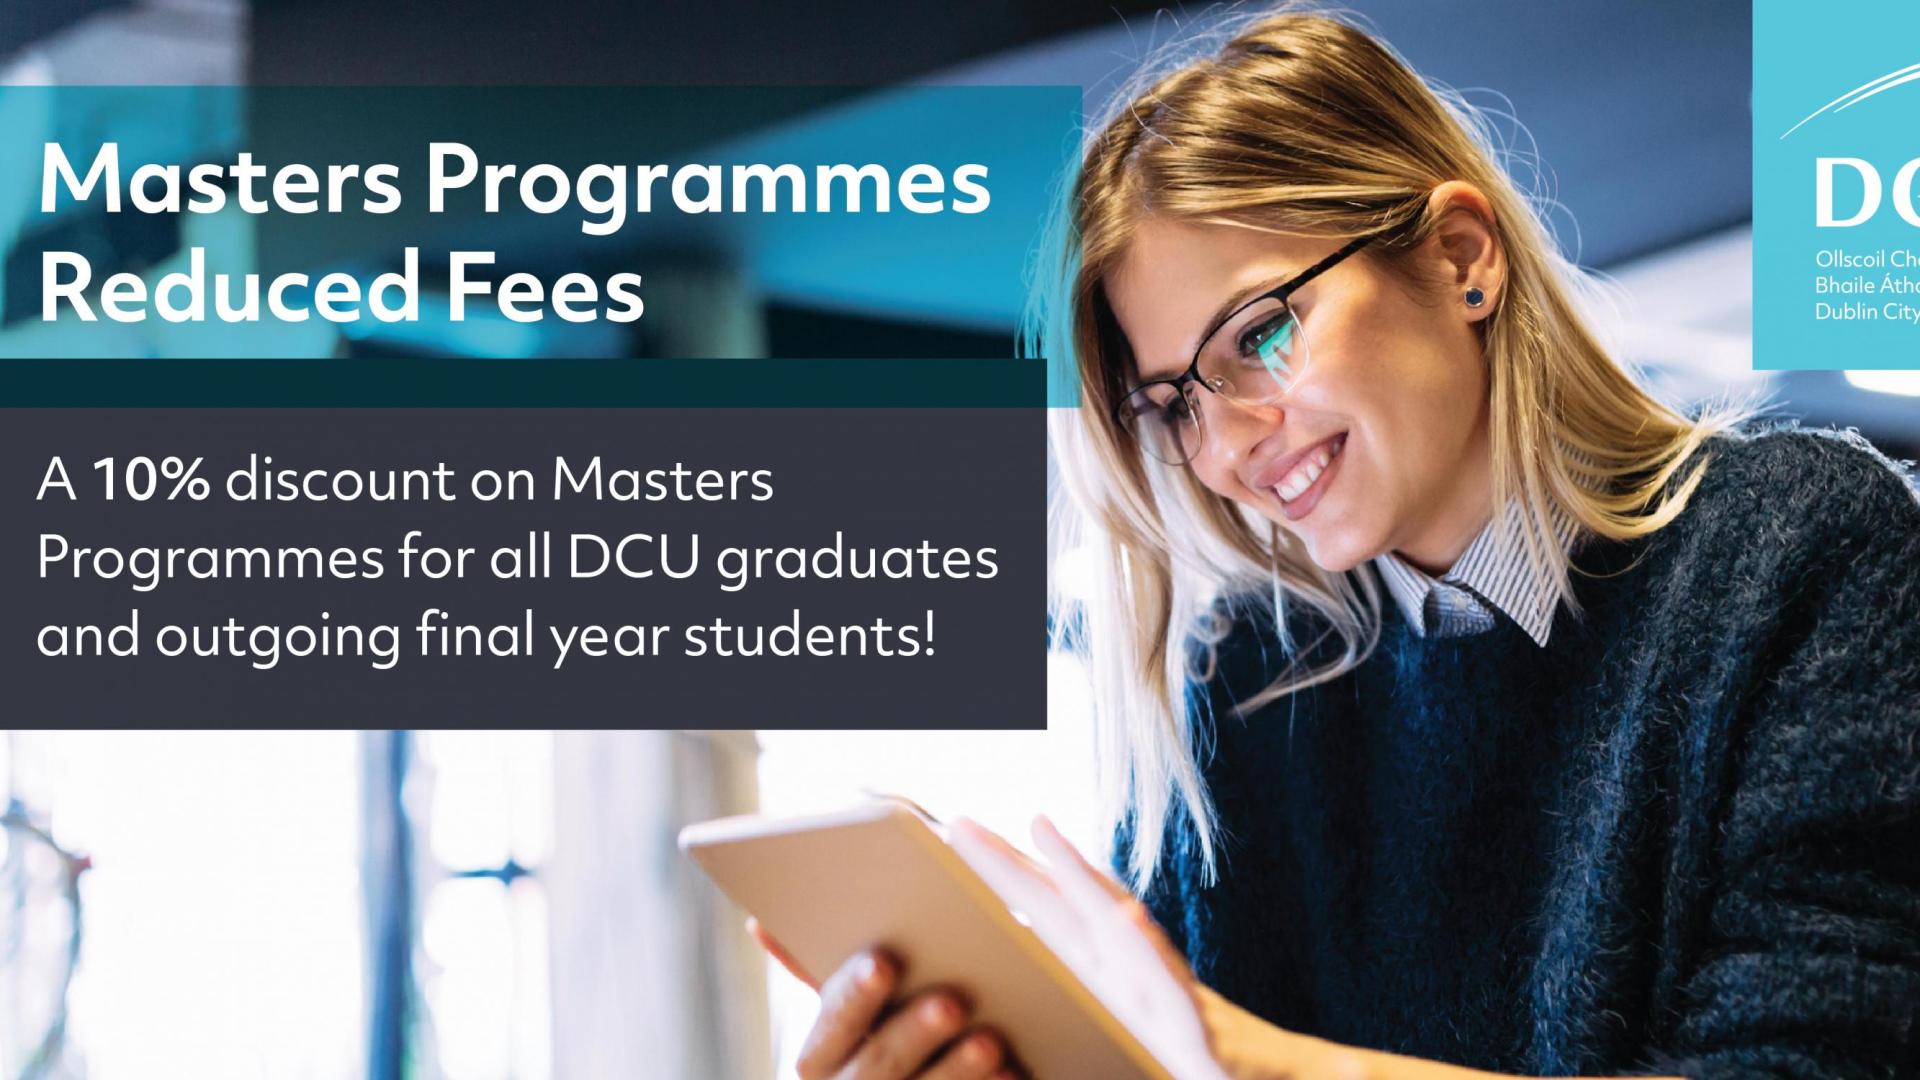 Reduced Masters Fees for all DCU alumni